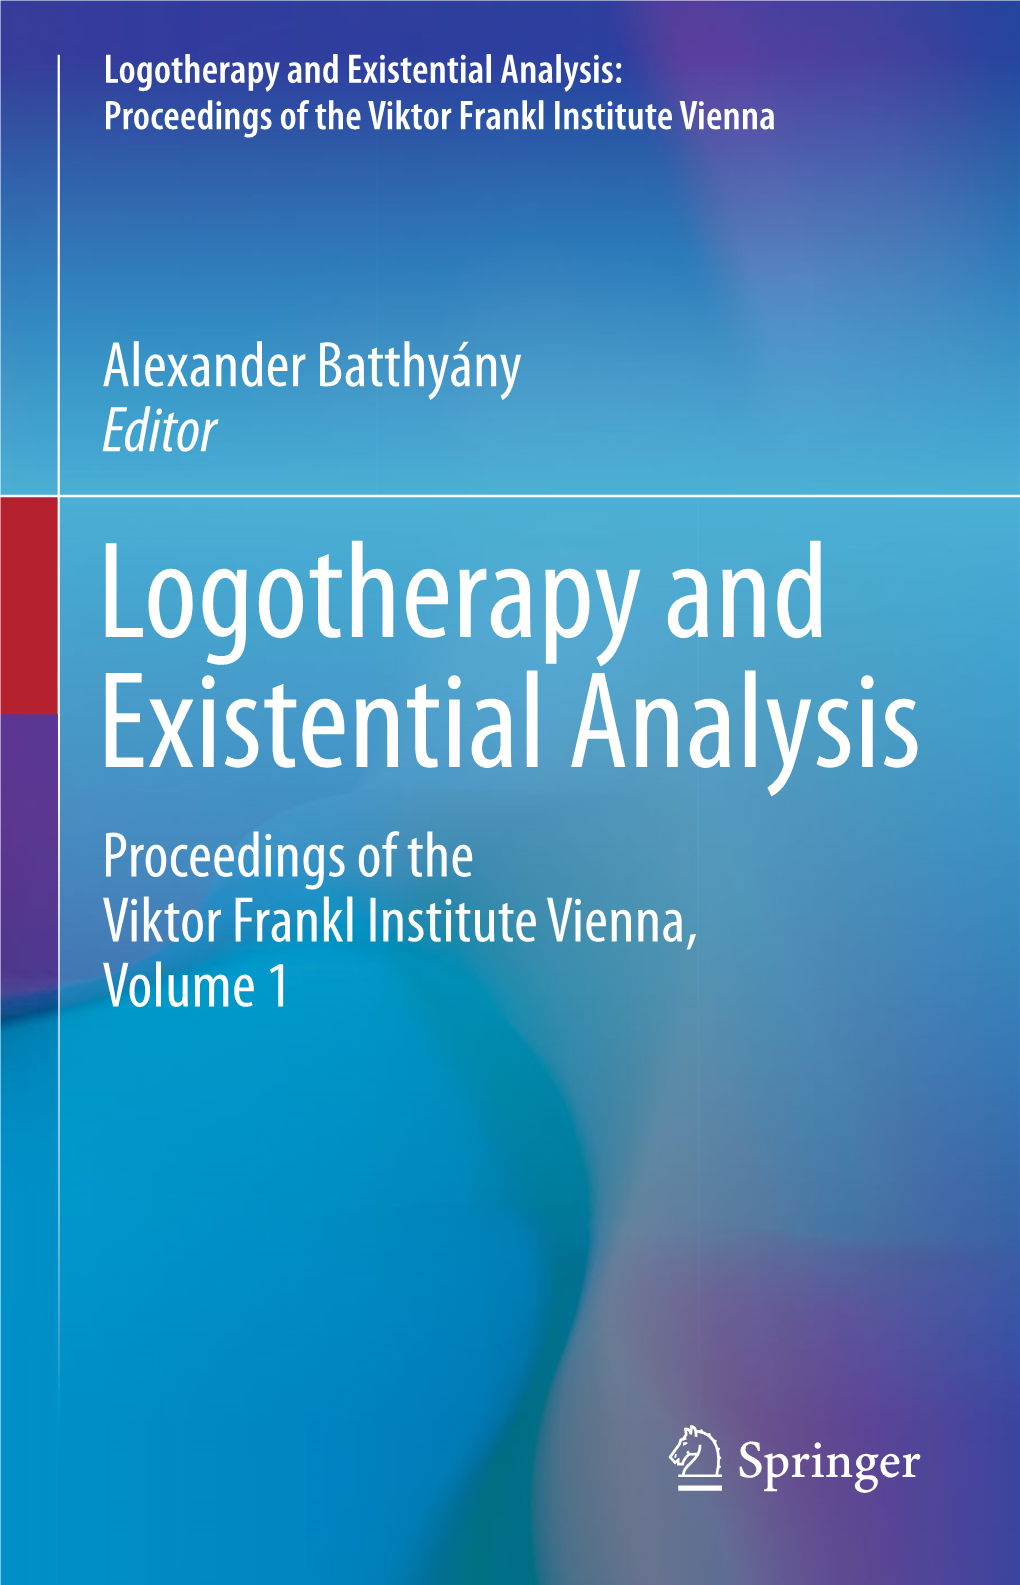 Logotherapy and Existential Analysis: Proceedings of the Viktor Frankl Institute Vienna